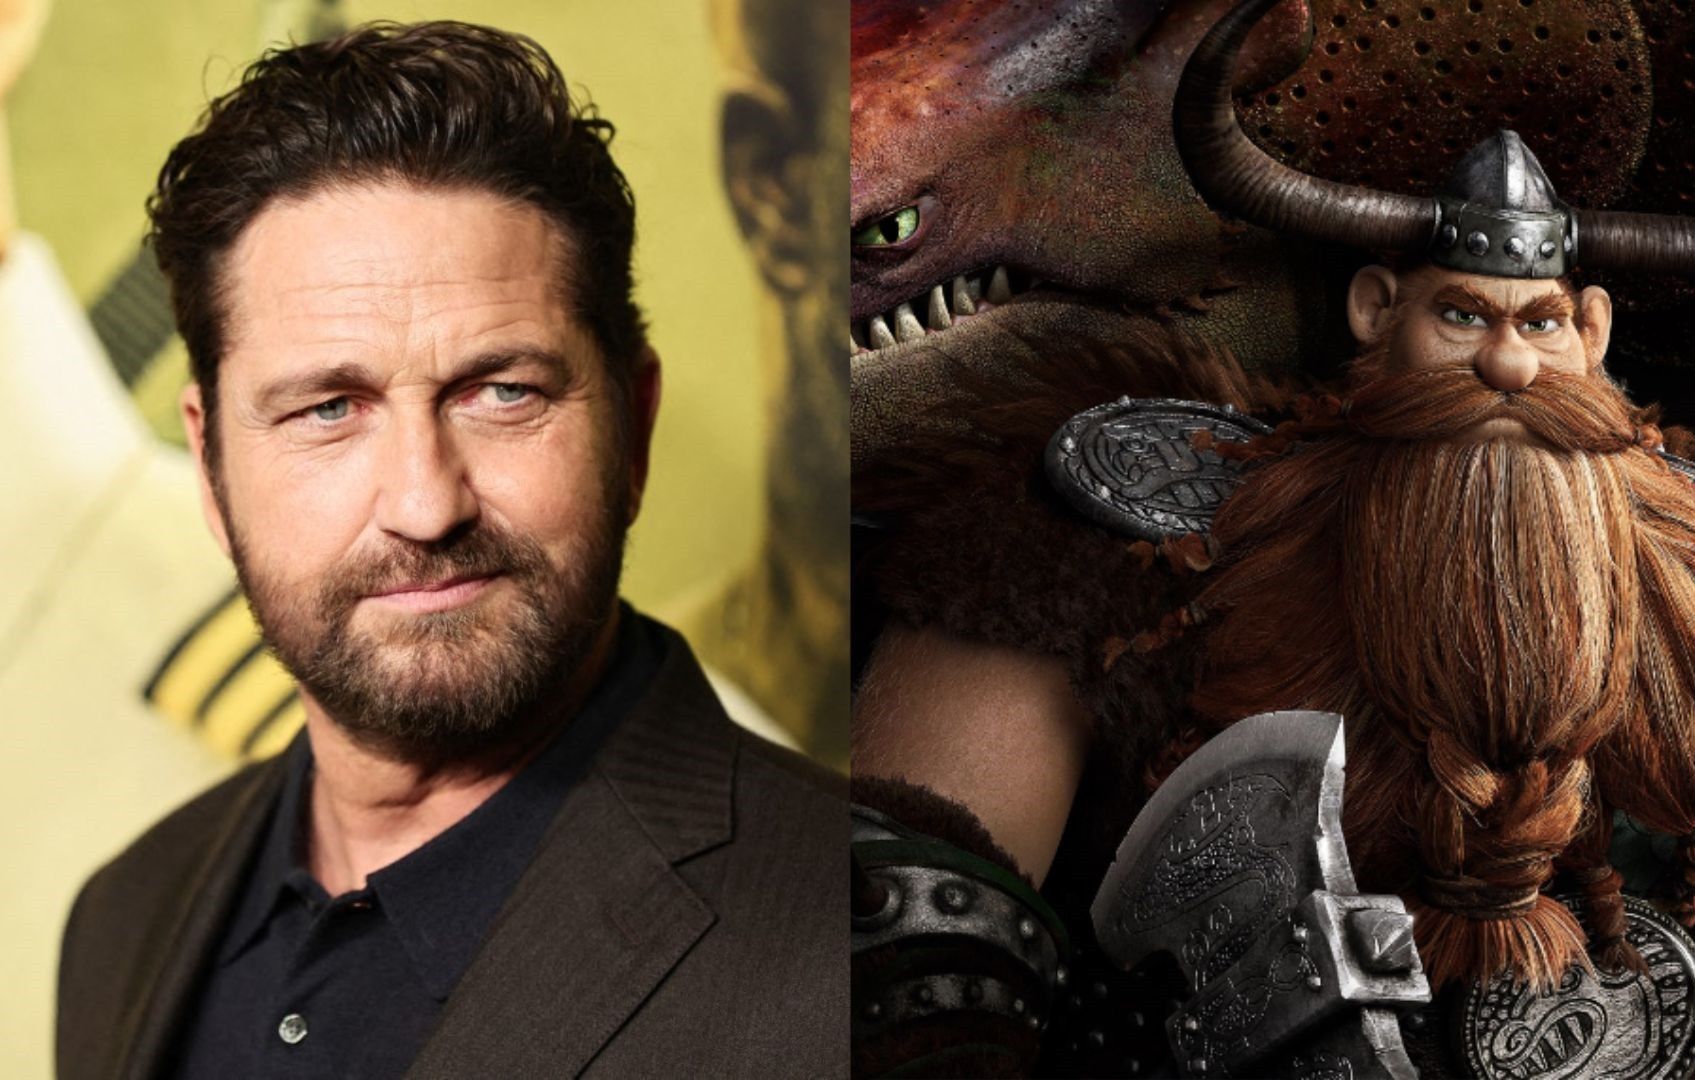 How To Train Your Dragon': Gerard Butler Reprising Stoick Role In New Movie